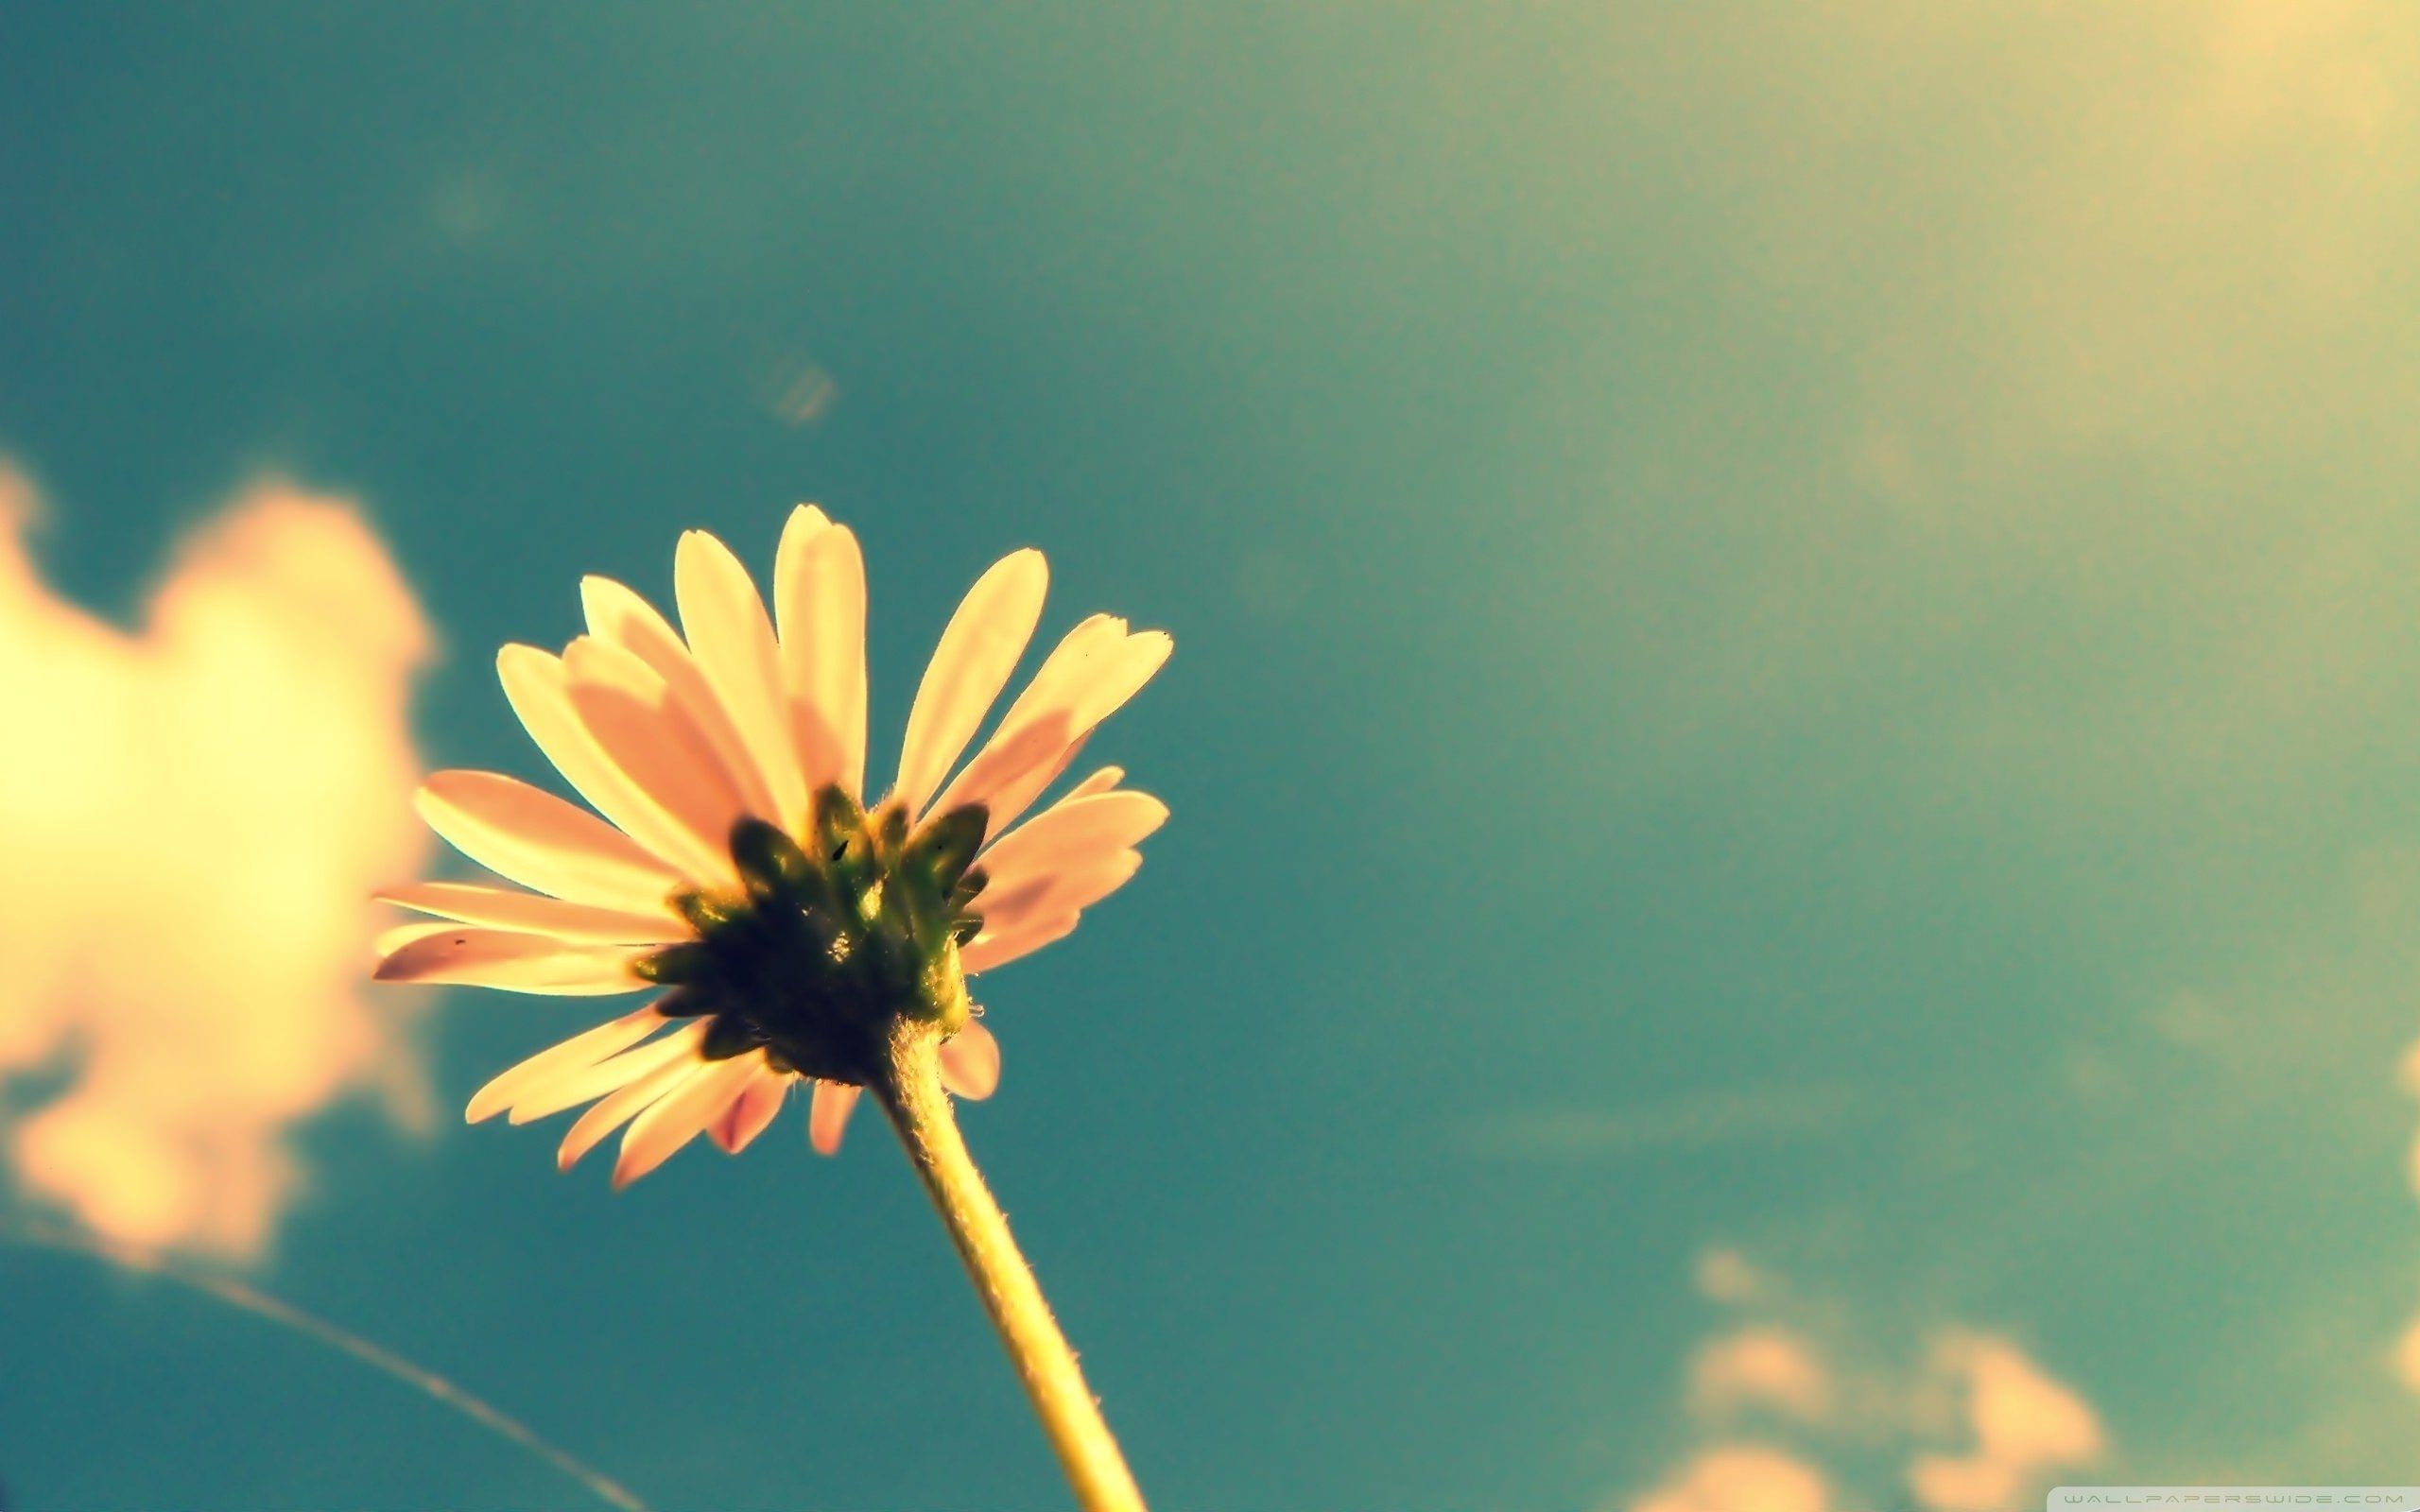 A flower looking up at the sky - Vintage, retro, sunshine